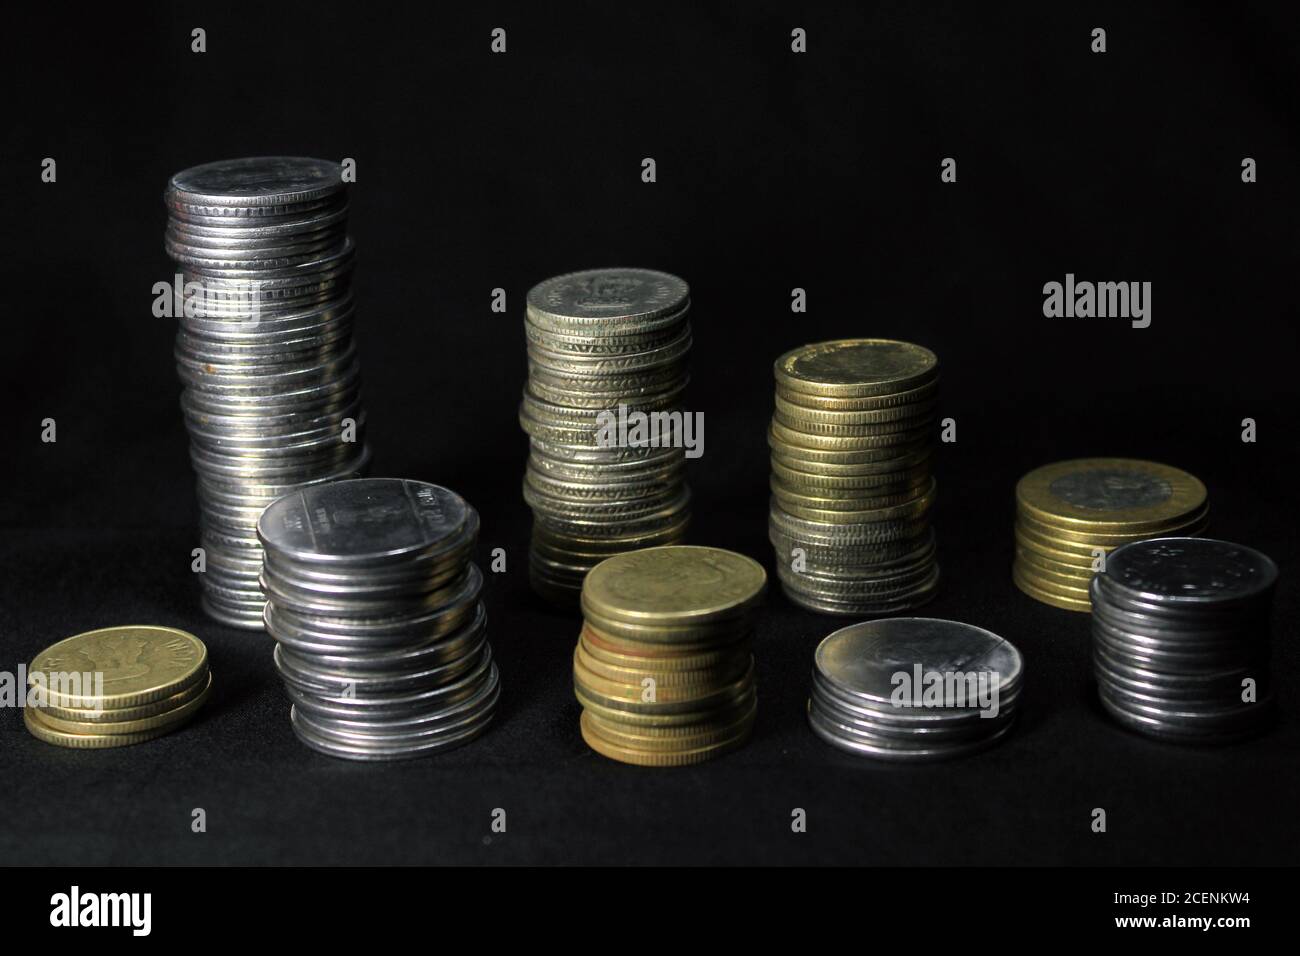 Stock pile of 1, 2, 5, 10 Indian rupee metal coin currency isolated on black background. Financial, economy, investment concept. Banking and exchange Stock Photo